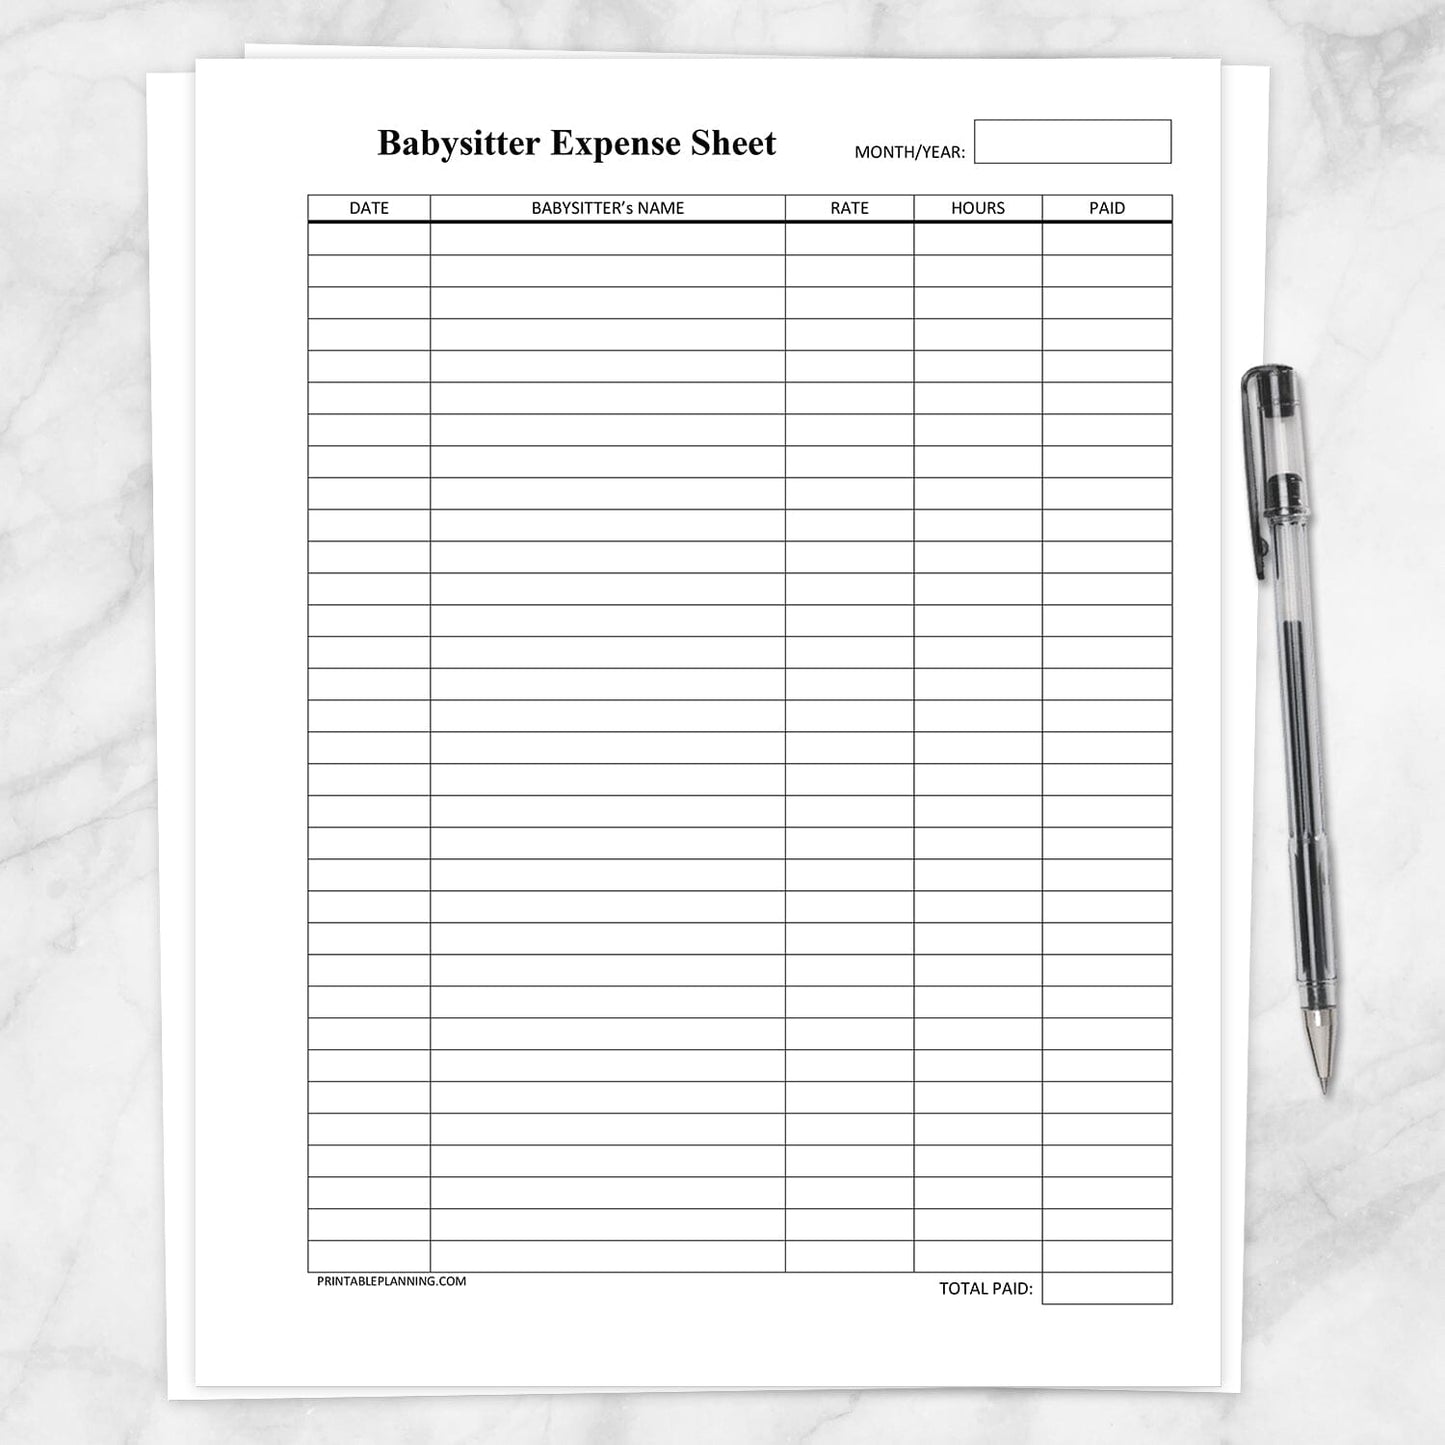 Printable Monthly Babysitter Expense Sheet at Printable Planning.